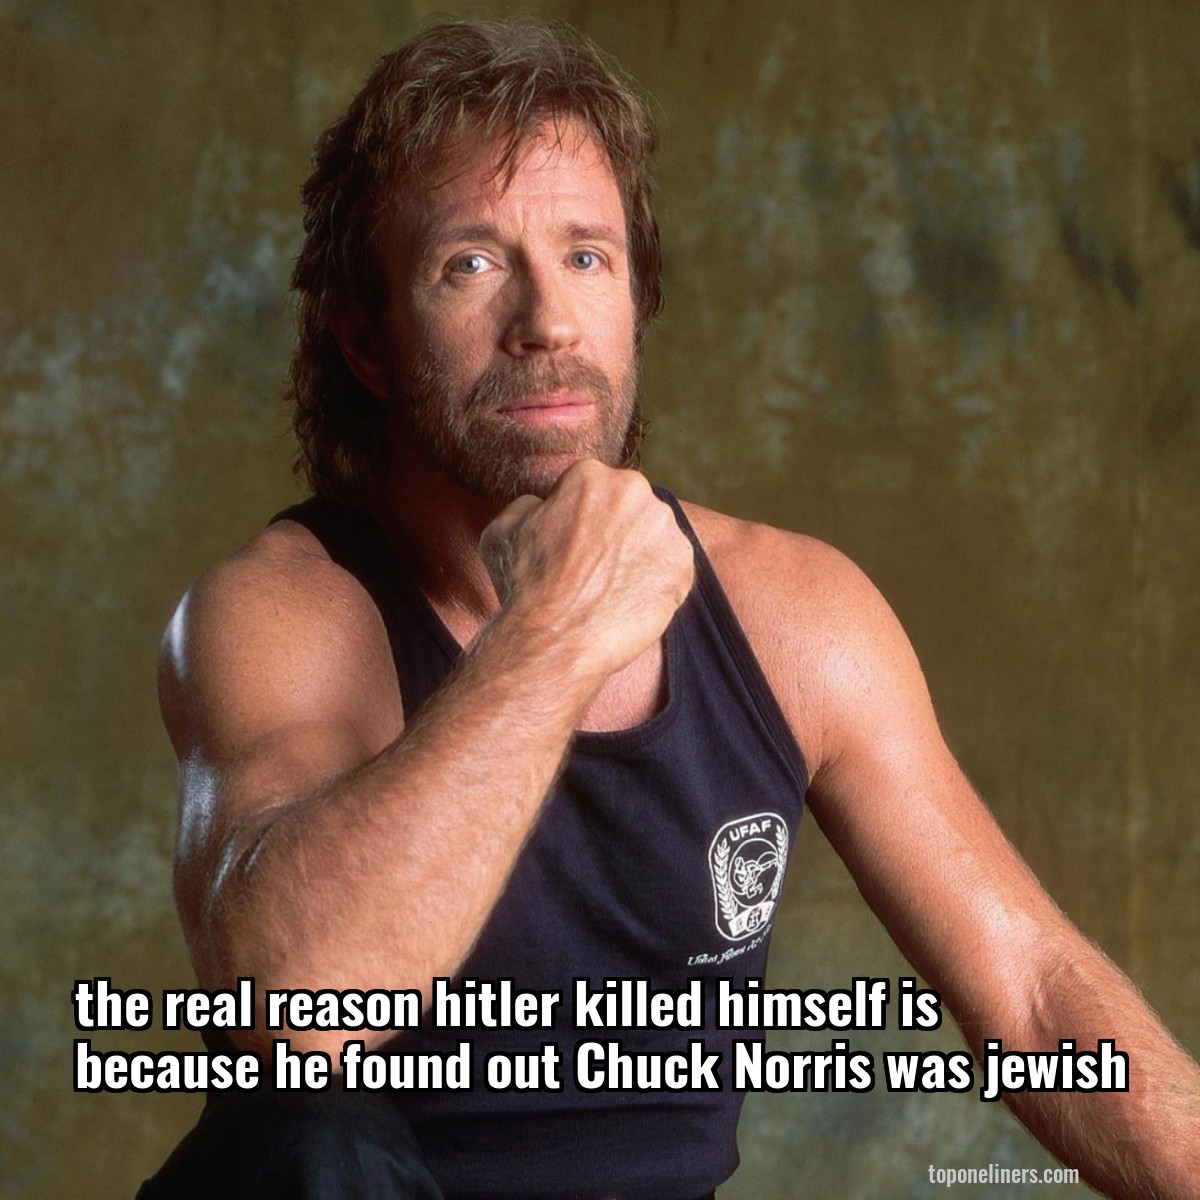 the real reason hitler killed himself is because he found out Chuck Norris was jewish